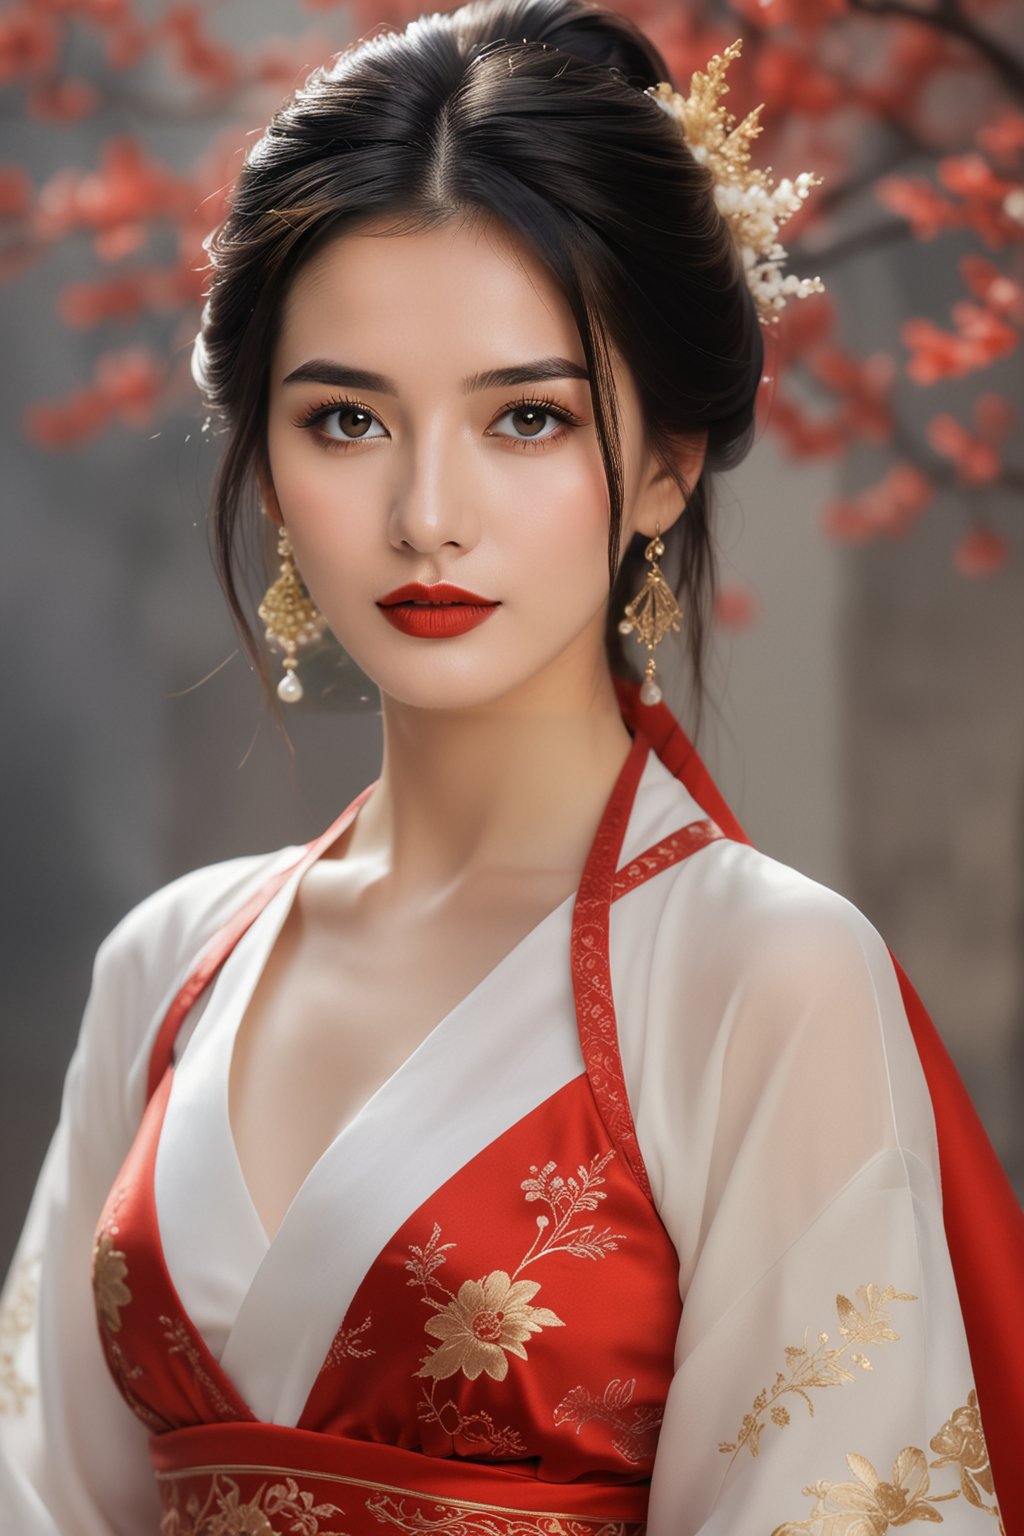 masterpiece,hubggirl,white dress,upper body,walking,looking at viewer, masterpiece,32k,extremely detailed cg unity 8k wallpaper, best quality, vibrant colors, break, china goddess, see through,1girl, long hair, black hair,dodger red see through clothes,gold dress,transparent shawl,1girl,red hanfu,earrings,best quality,masterpiece,raw photo, detailed face, beautiful symmetrical face, cute natural makeup, sadness, feminine, highly detailed, oriental minimalism, subtle elegance, hd , in the style of elegant clothing, realistic yet ethereal, simplistic designs, oriental, whimsical shapes, serene harmony beautiful symmetrical face, elegant, feminine, highly detailed, intricate,best quality, ultra-detailed, masterpiece, hires, 8k,(photorealistic),transparent,skin white and smooth,transparent shawl,high heels,